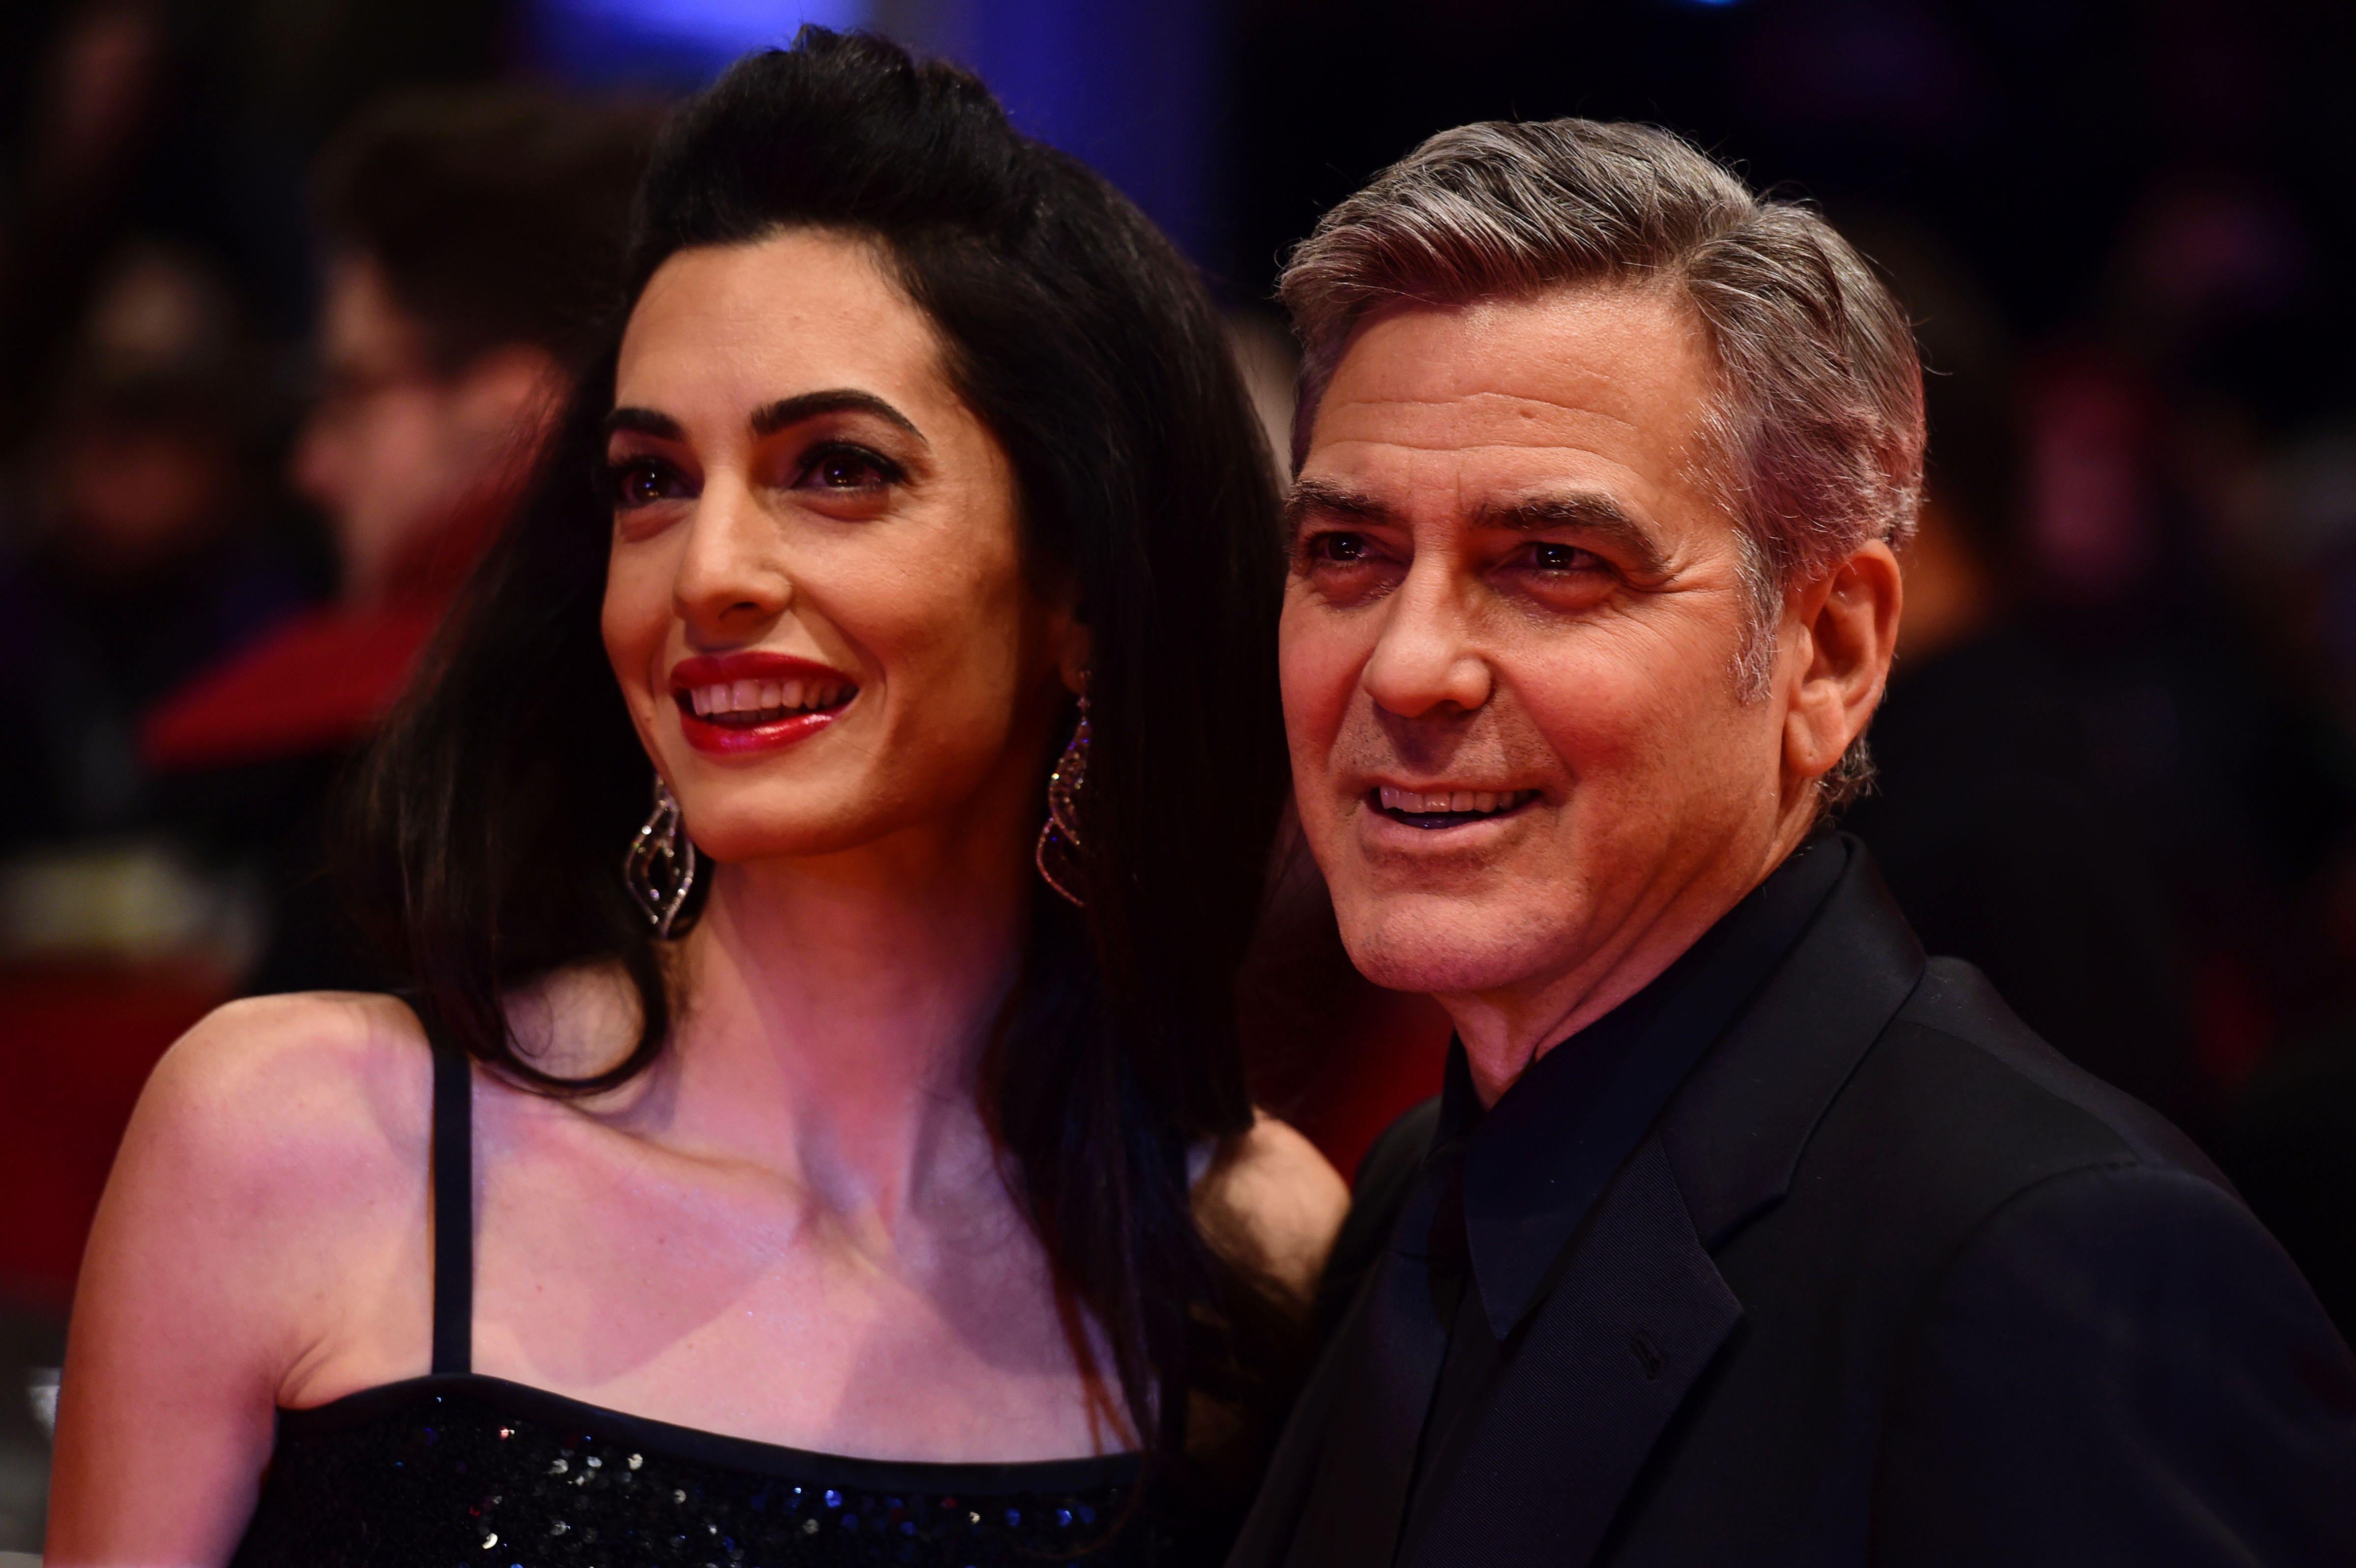 Amal and George Clooney at the 66th Berlinale Film Festival in Berlin on February 11, 2016. | Source: Getty Images